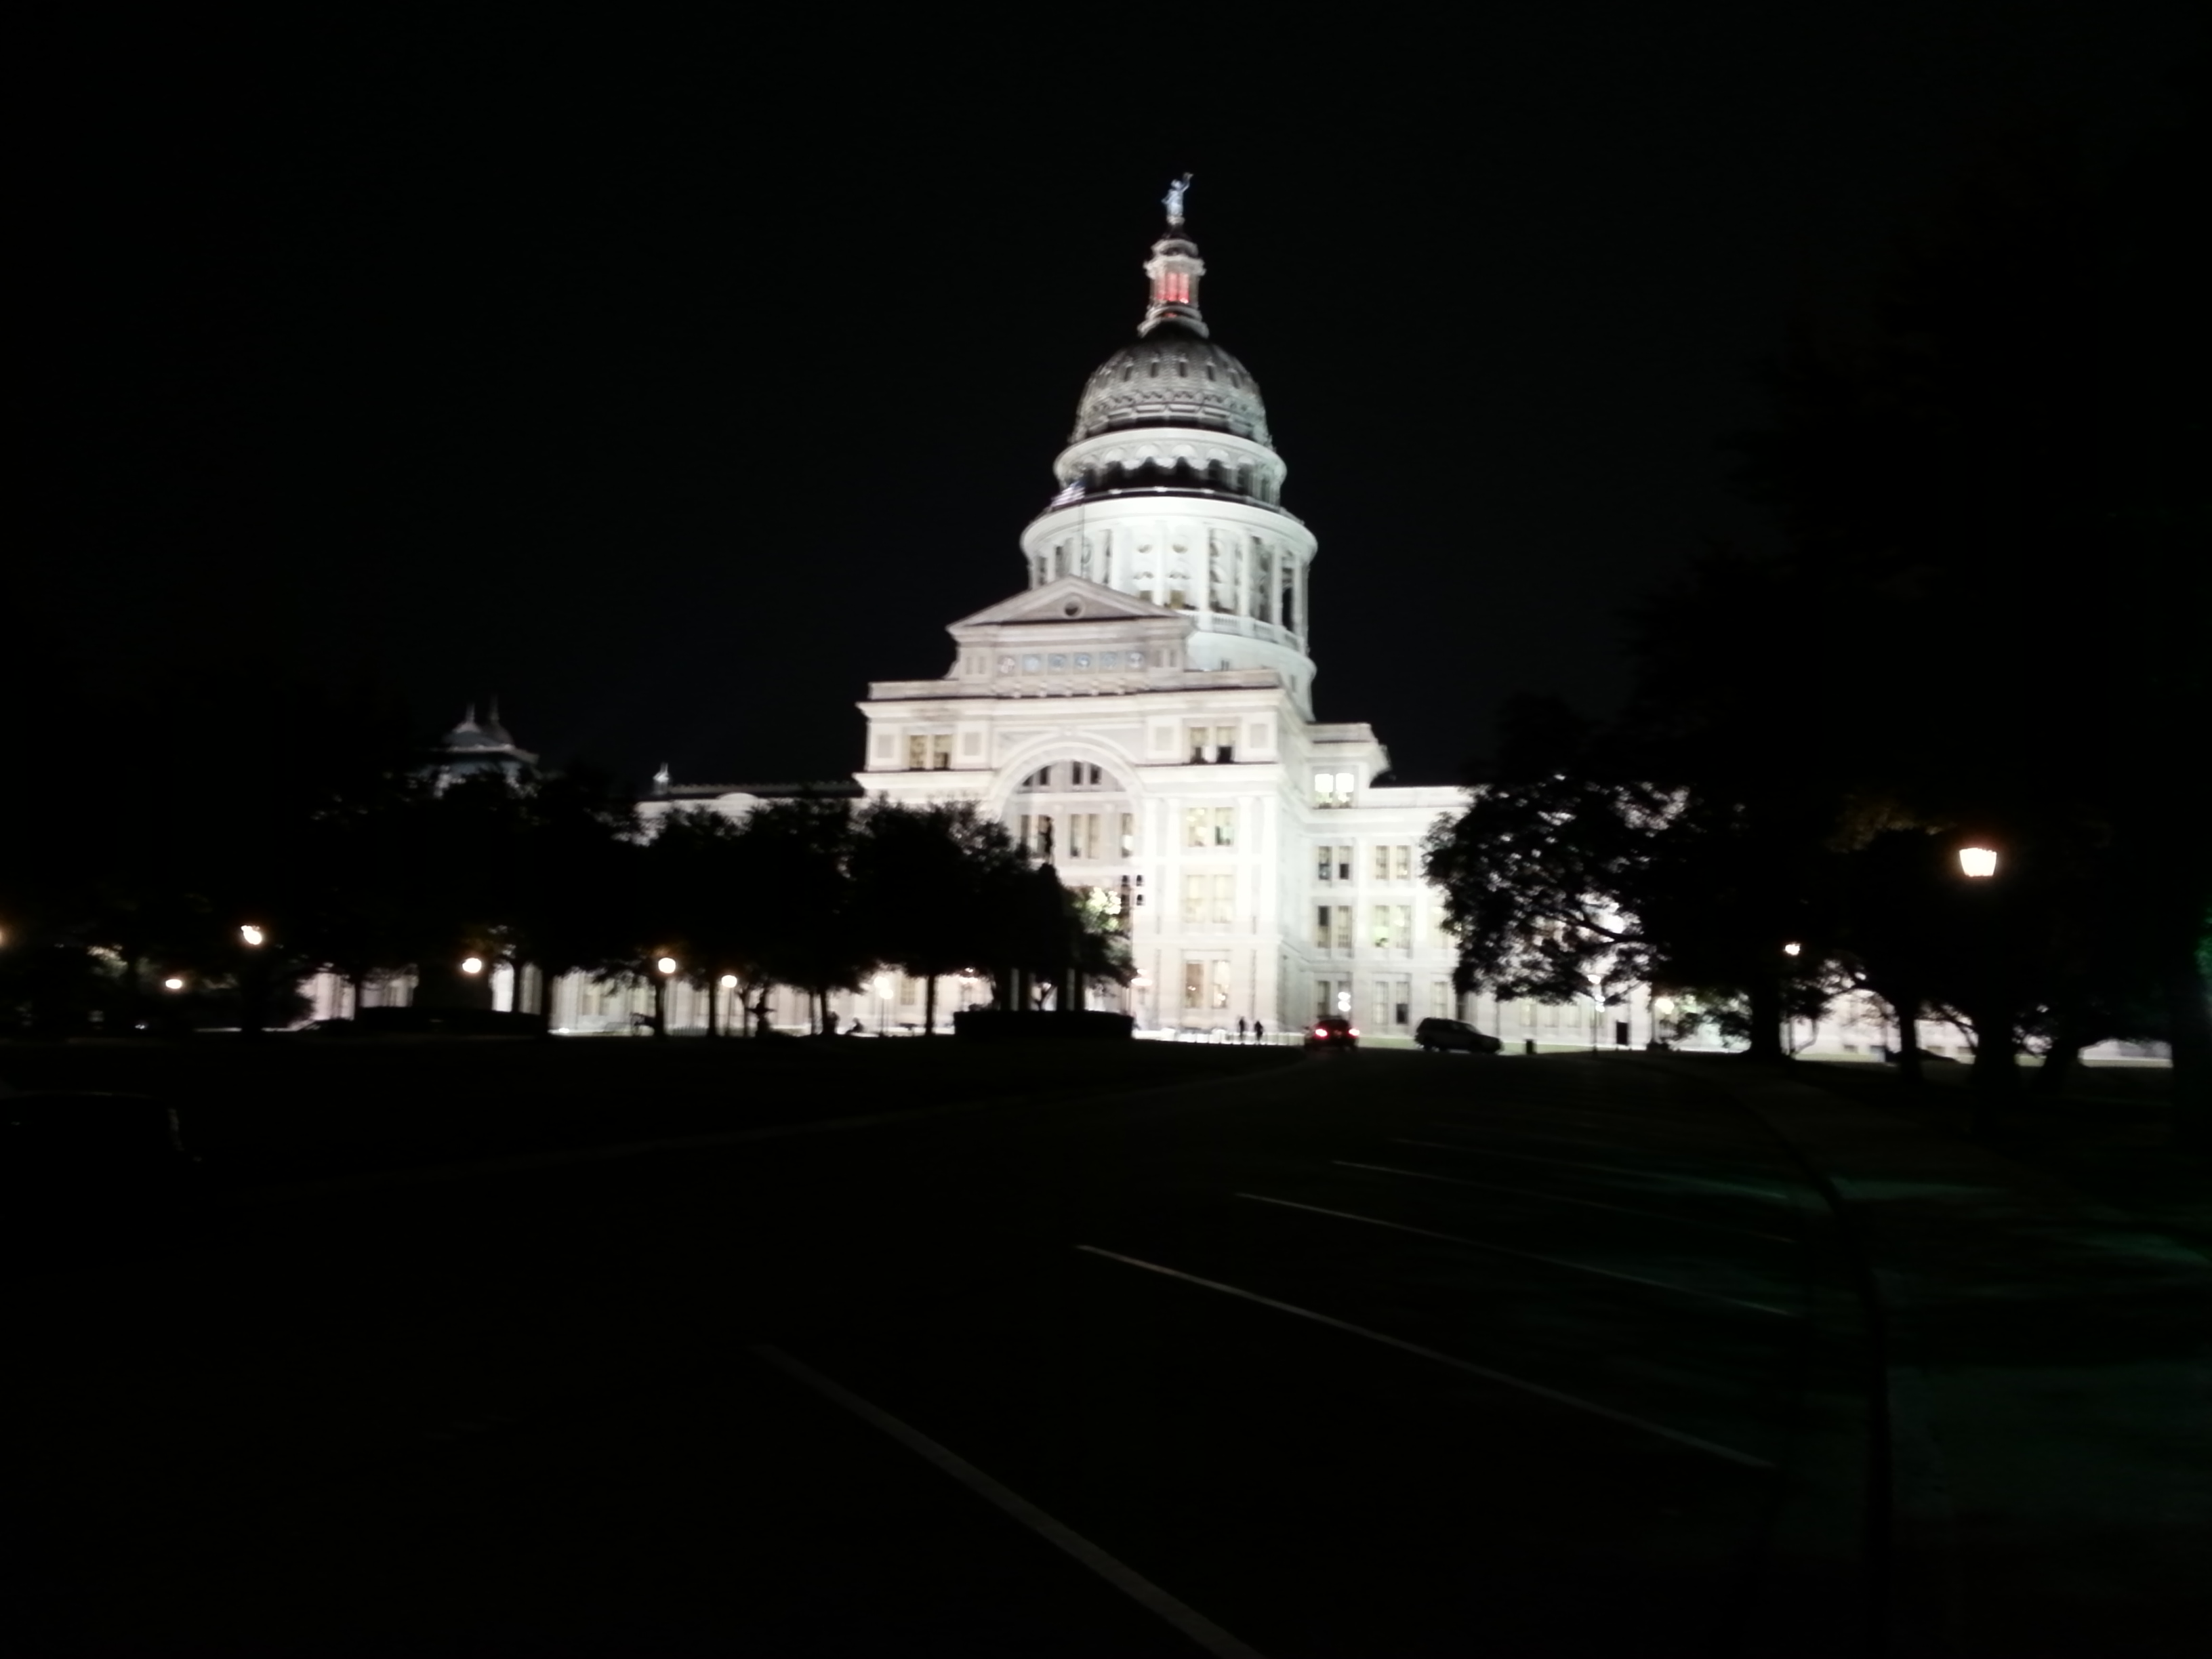 Texas State Capitol at night